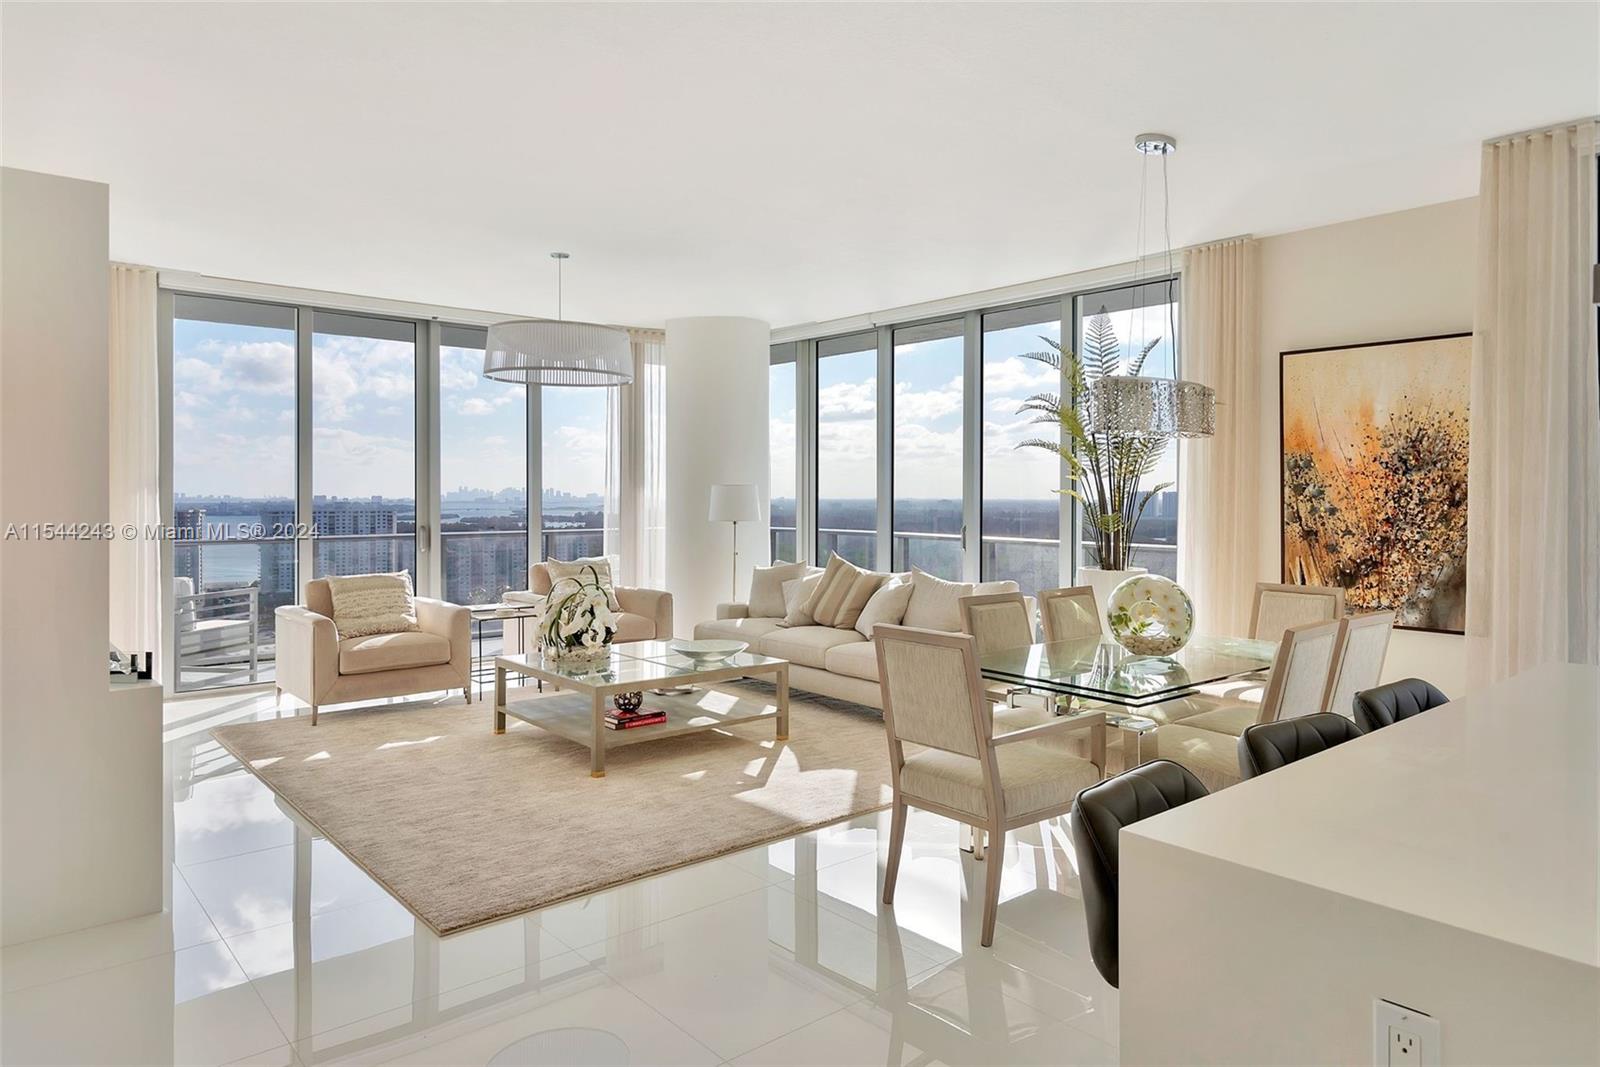 Property for Sale at 300 Sunny Isles Blvd 4-2508, Sunny Isles Beach, Miami-Dade County, Florida - Bedrooms: 3 
Bathrooms: 4  - $1,999,999